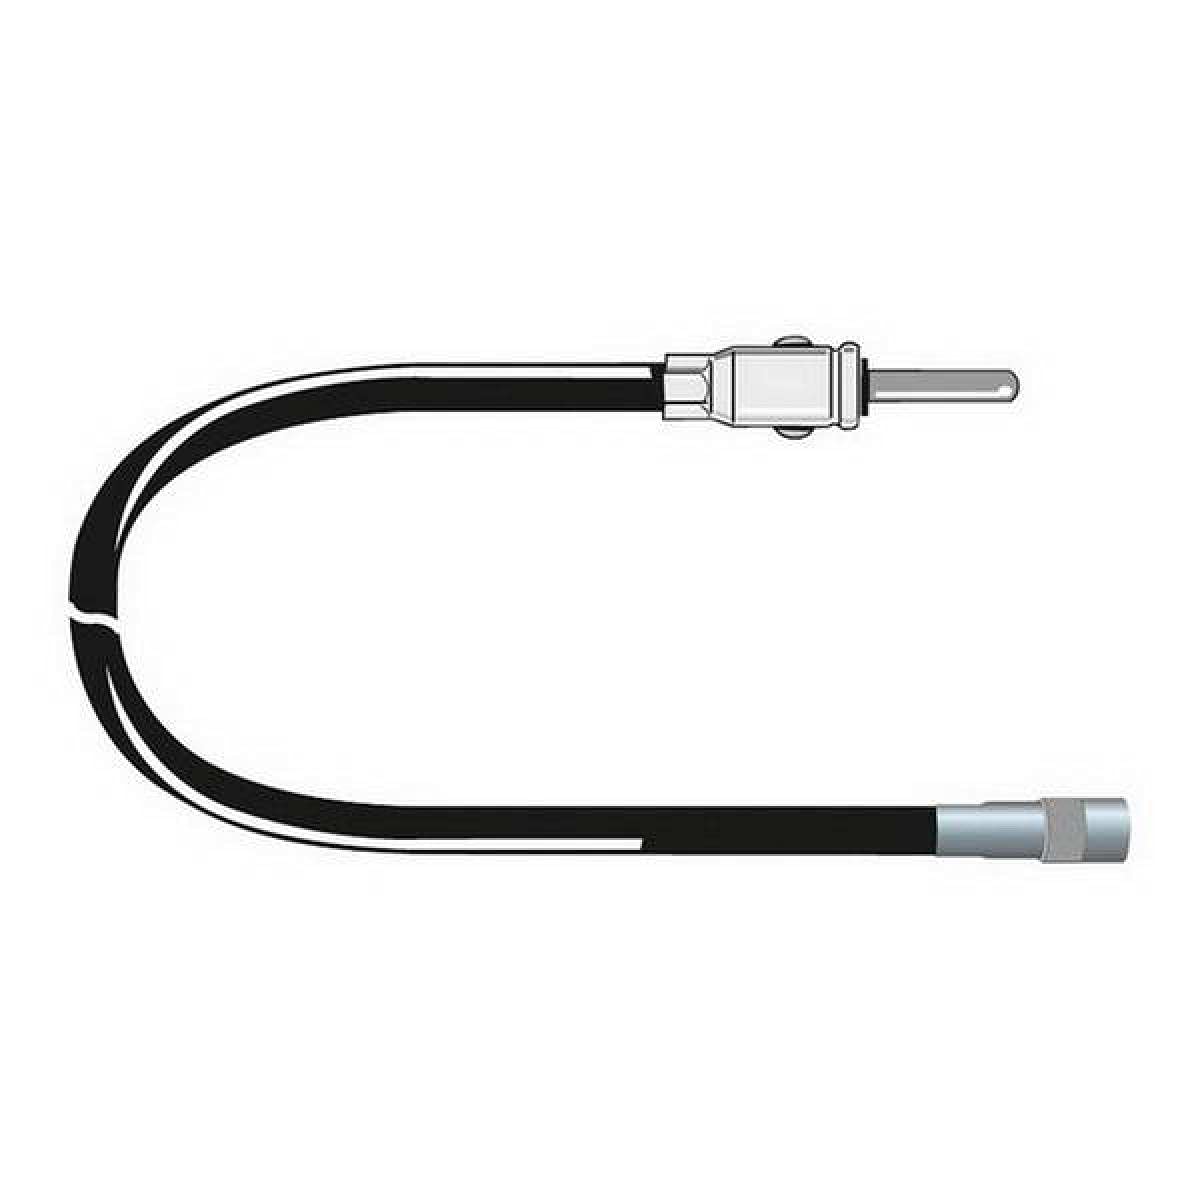 Carcoustic 6003106 Antennen-Adapterkabel ISO weiblich - DIN 12V, 15 cm von Carcoustic